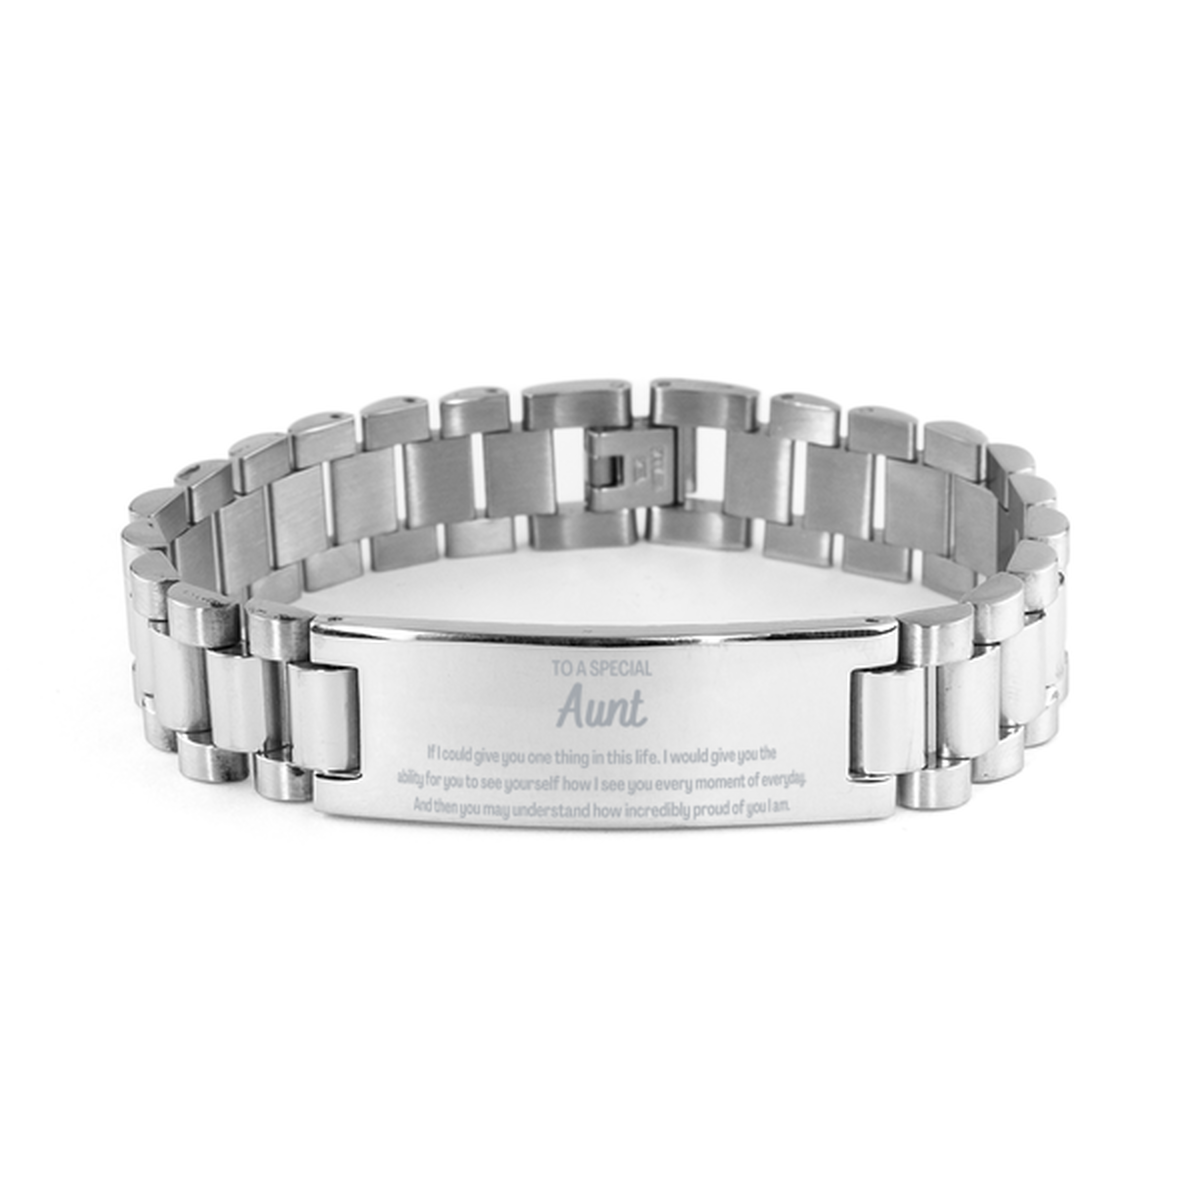 To My Aunt Ladder Stainless Steel Bracelet, Gifts For Aunt Engraved, Inspirational Gifts for Christmas Birthday, Epic Gifts for Aunt To A Special Aunt how incredibly proud of you I am